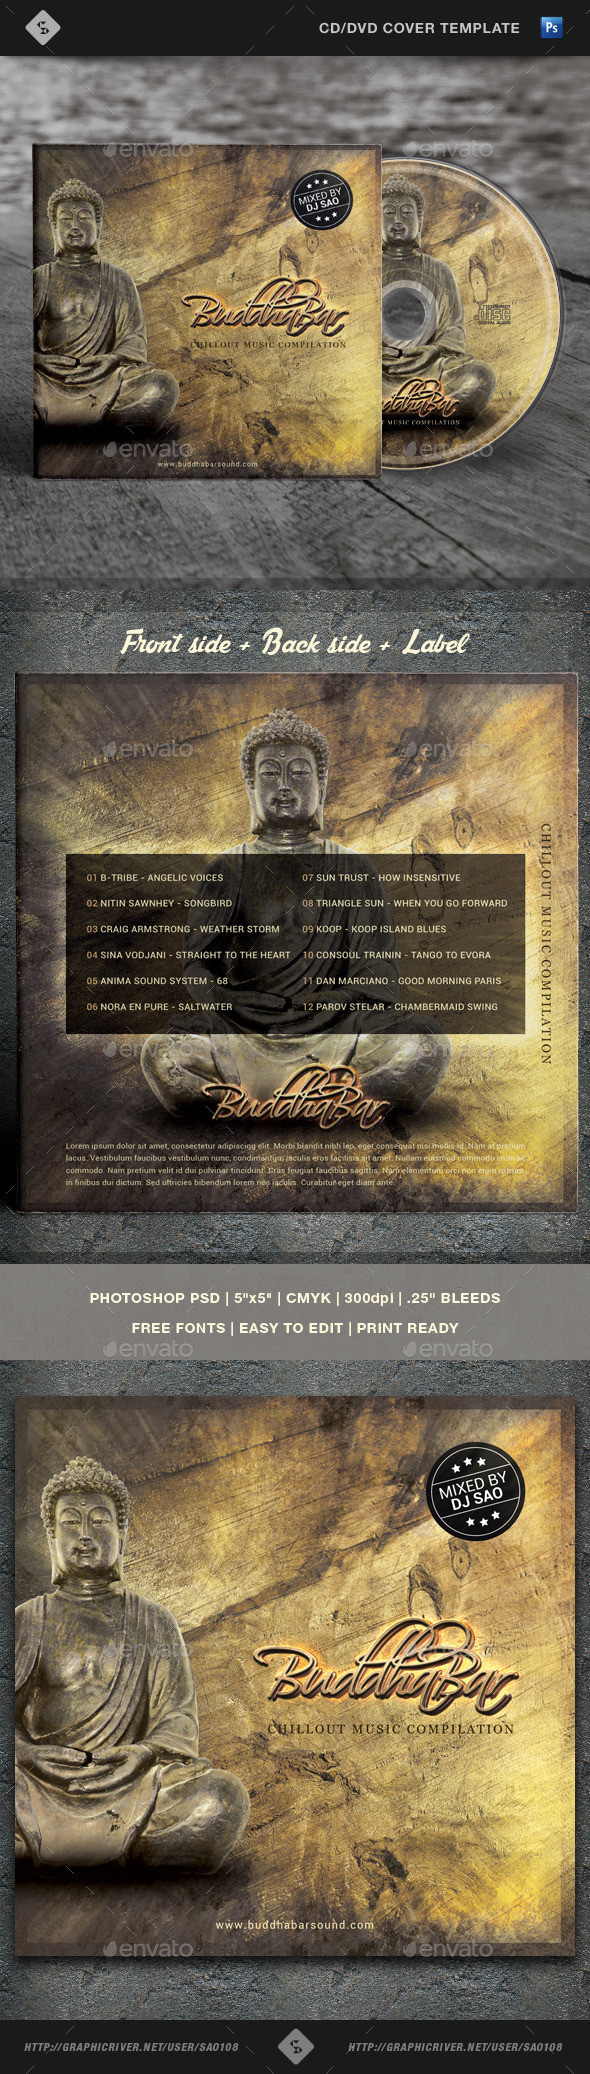 Buddhabar cd cover template preview